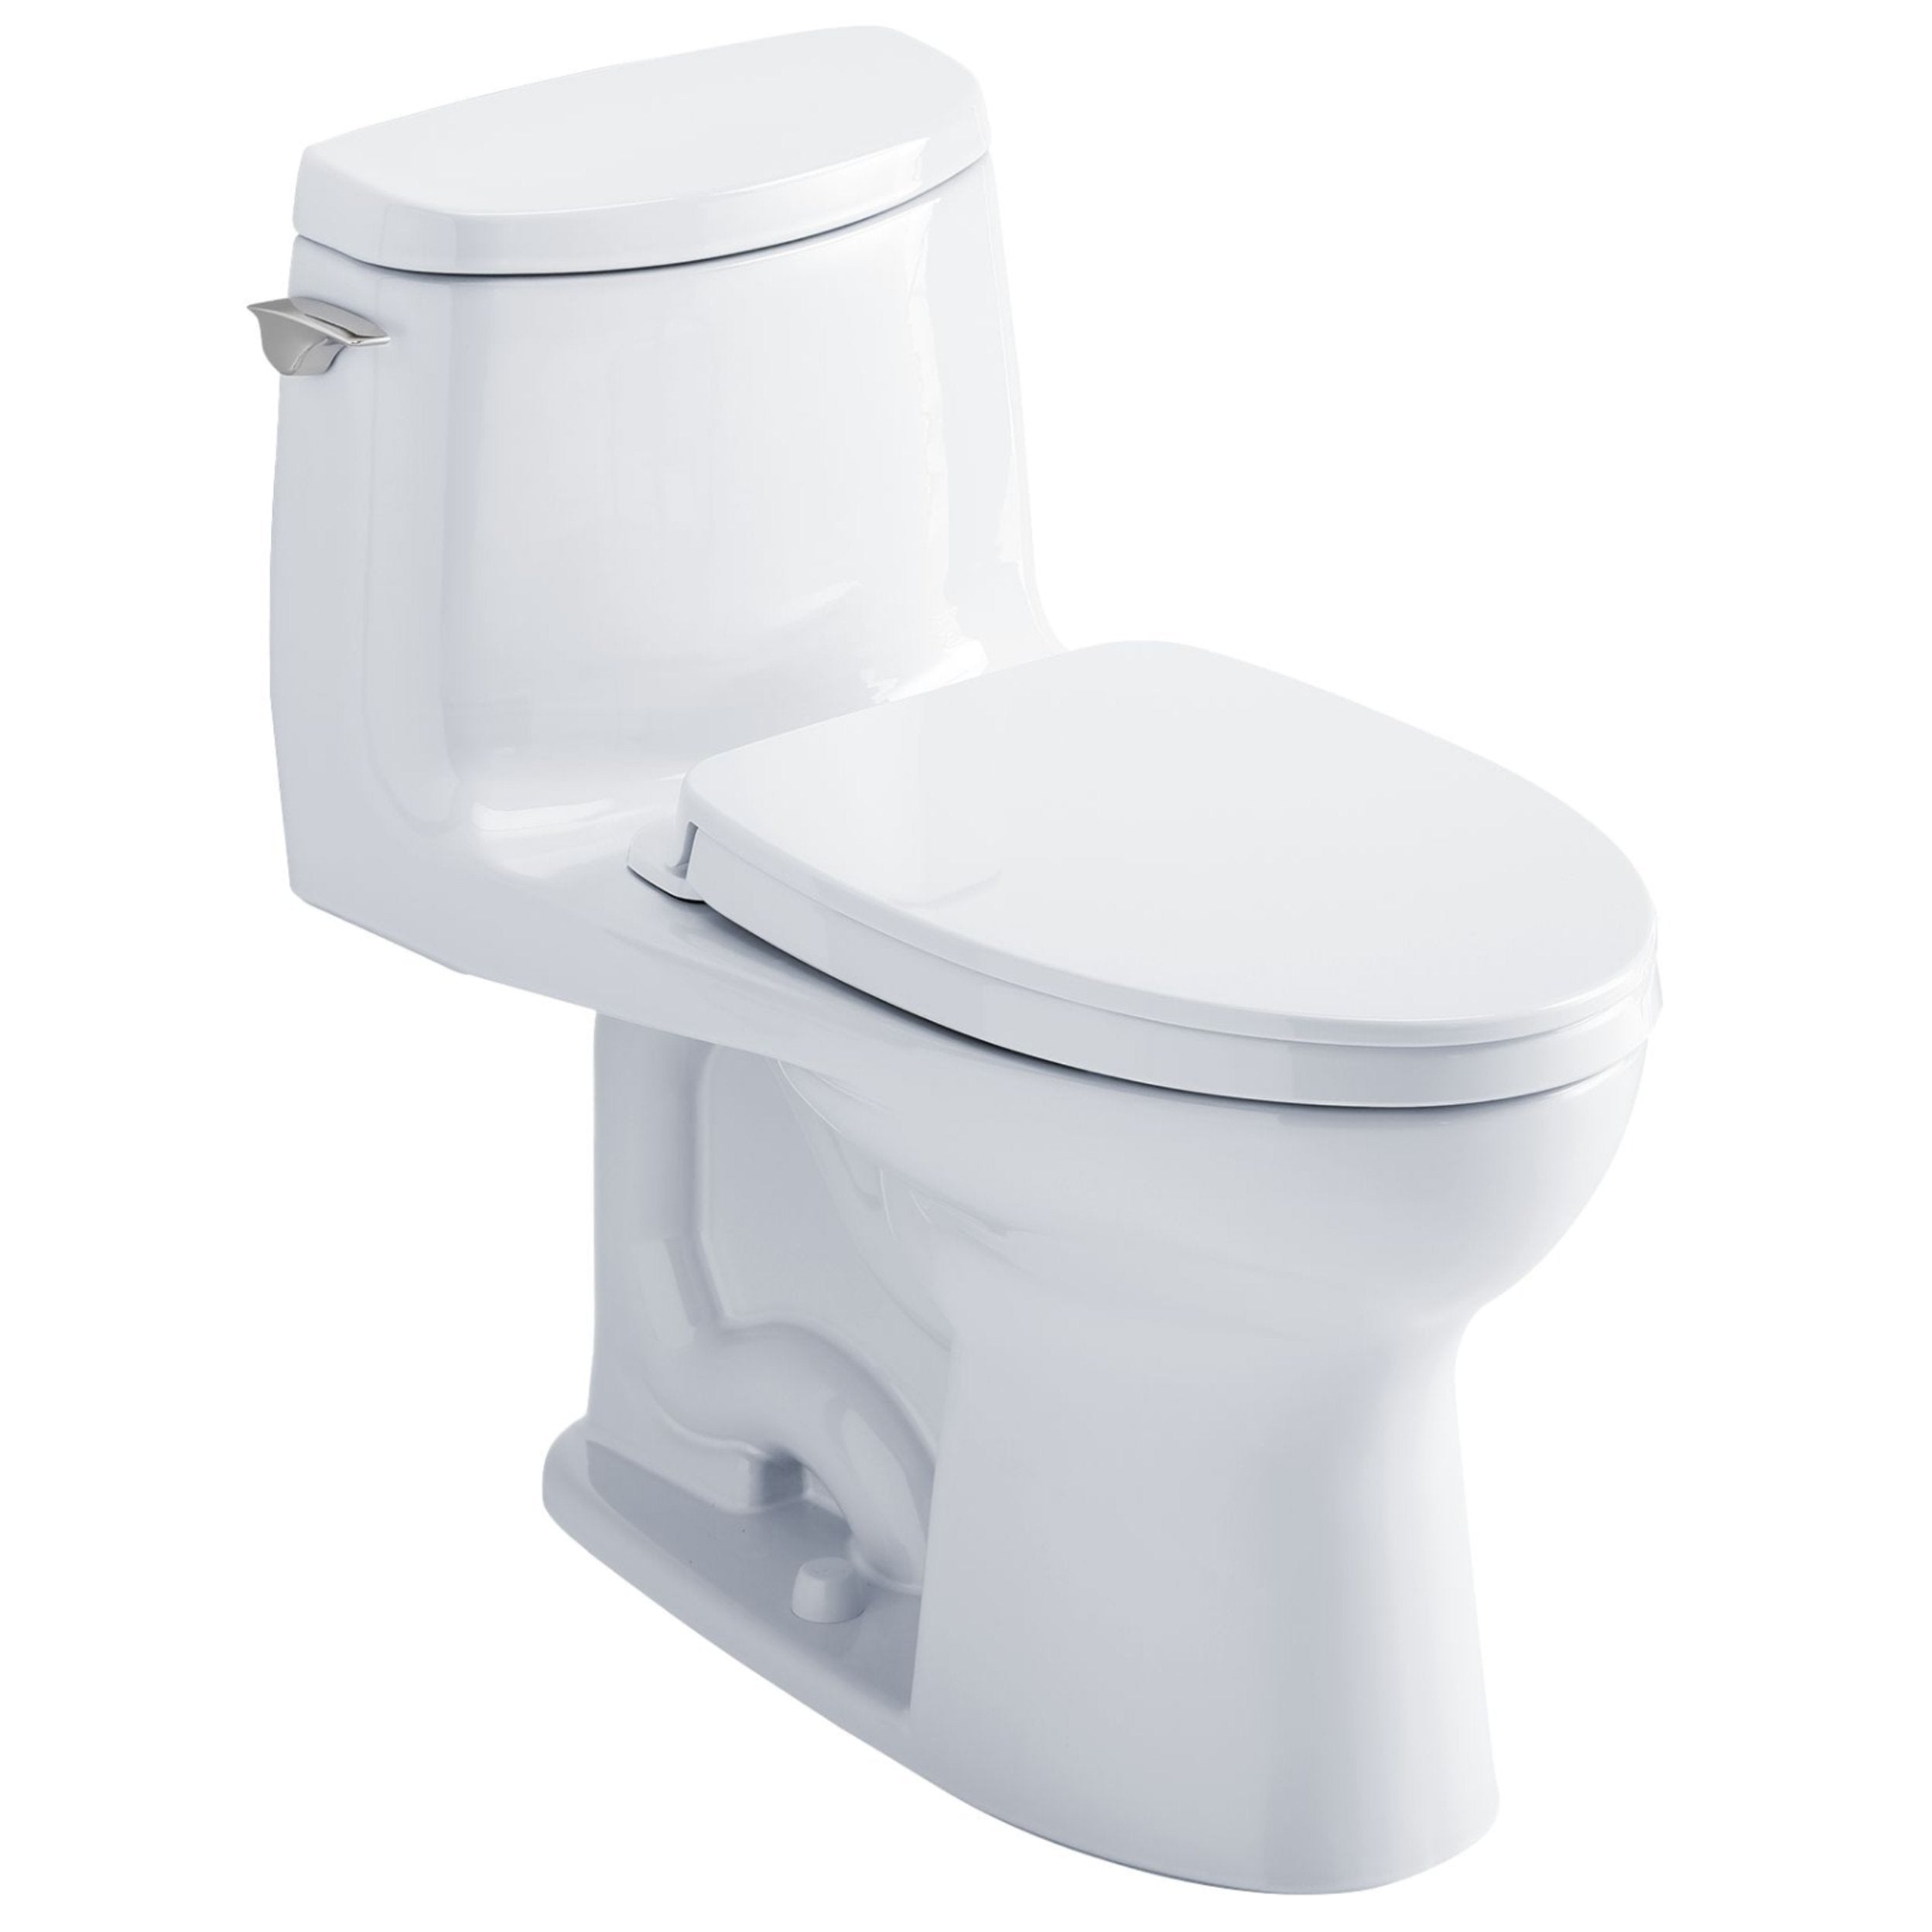 TOTO MS604124CUFG#01 UltraMax II 1G One-Piece Toilet, Elongated Bowl, 1.0  GPF, Washlet+ Connection - Cotton White - SKU - MS604124CUFG#01